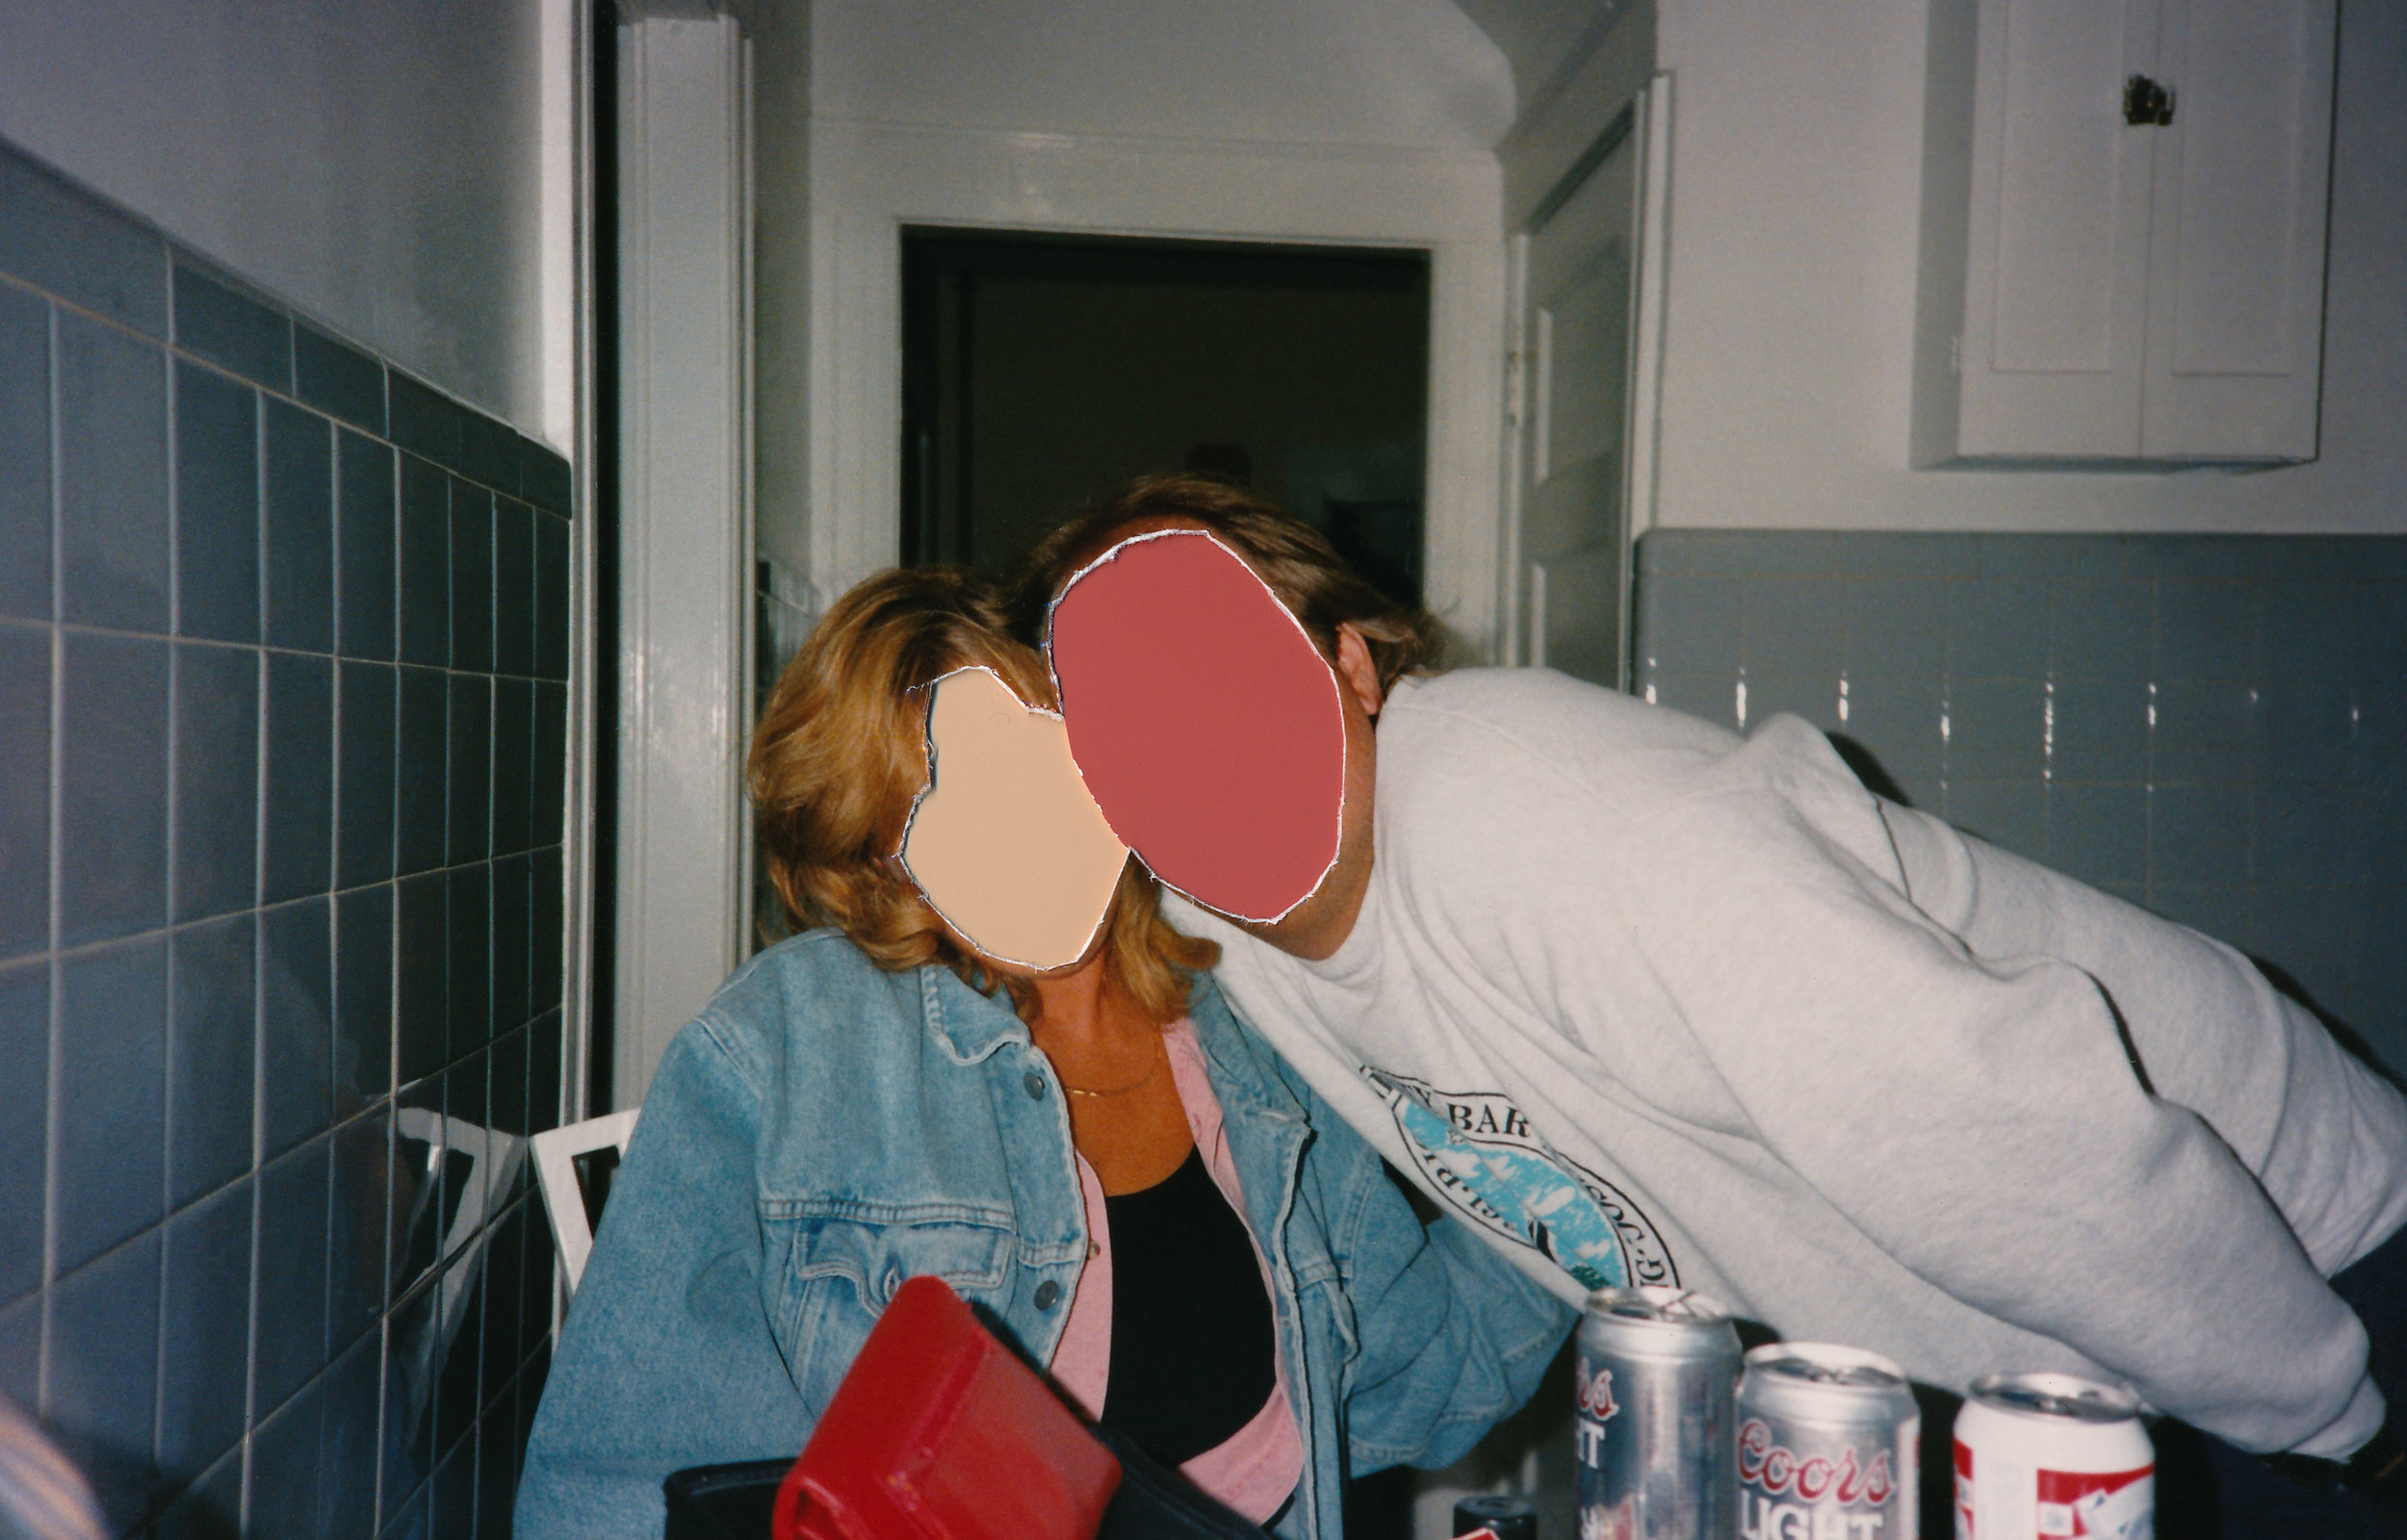 Mom and dad at their housewarming, 1994